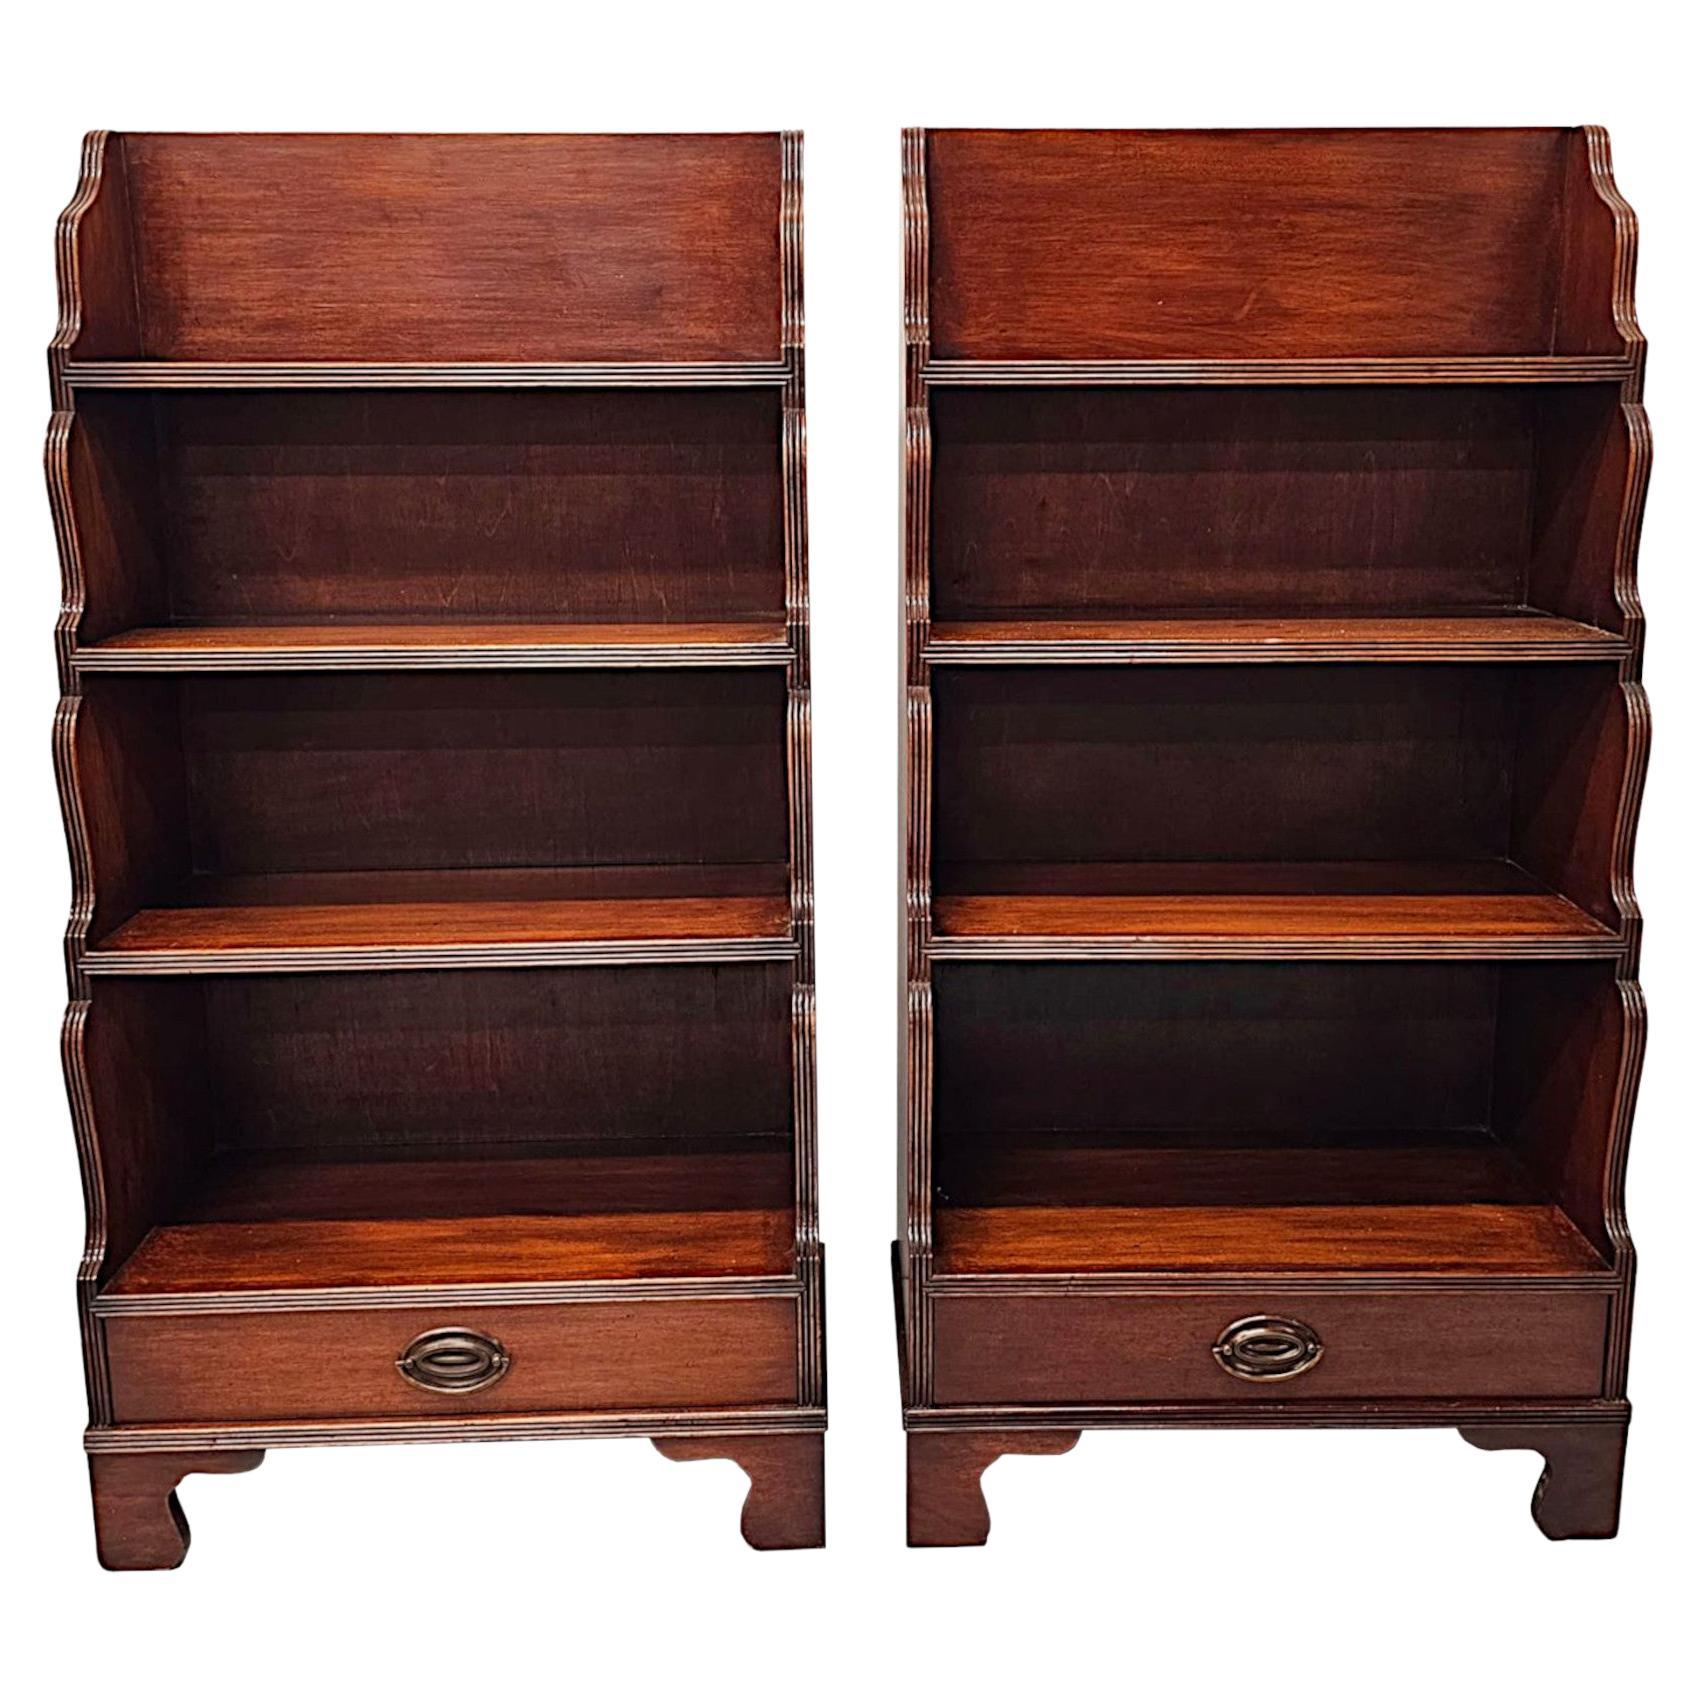 A Fabulous Pair of Edwardian Waterfall Bookcases For Sale